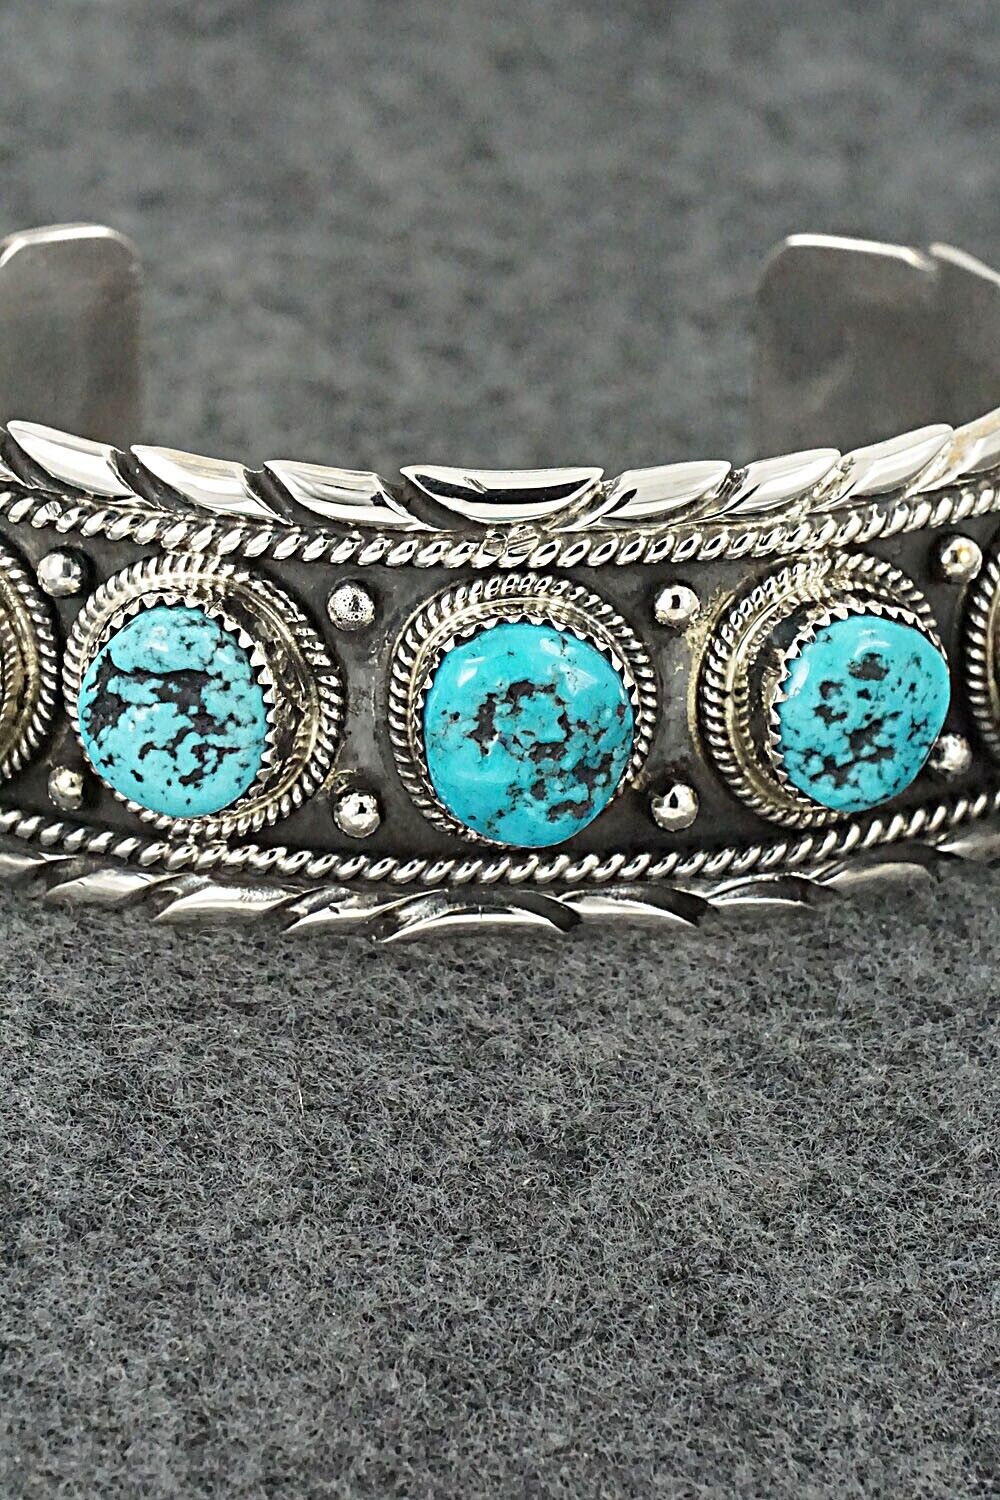 Turquoise and Sterling Silver Bracelet - Vernon Johnson